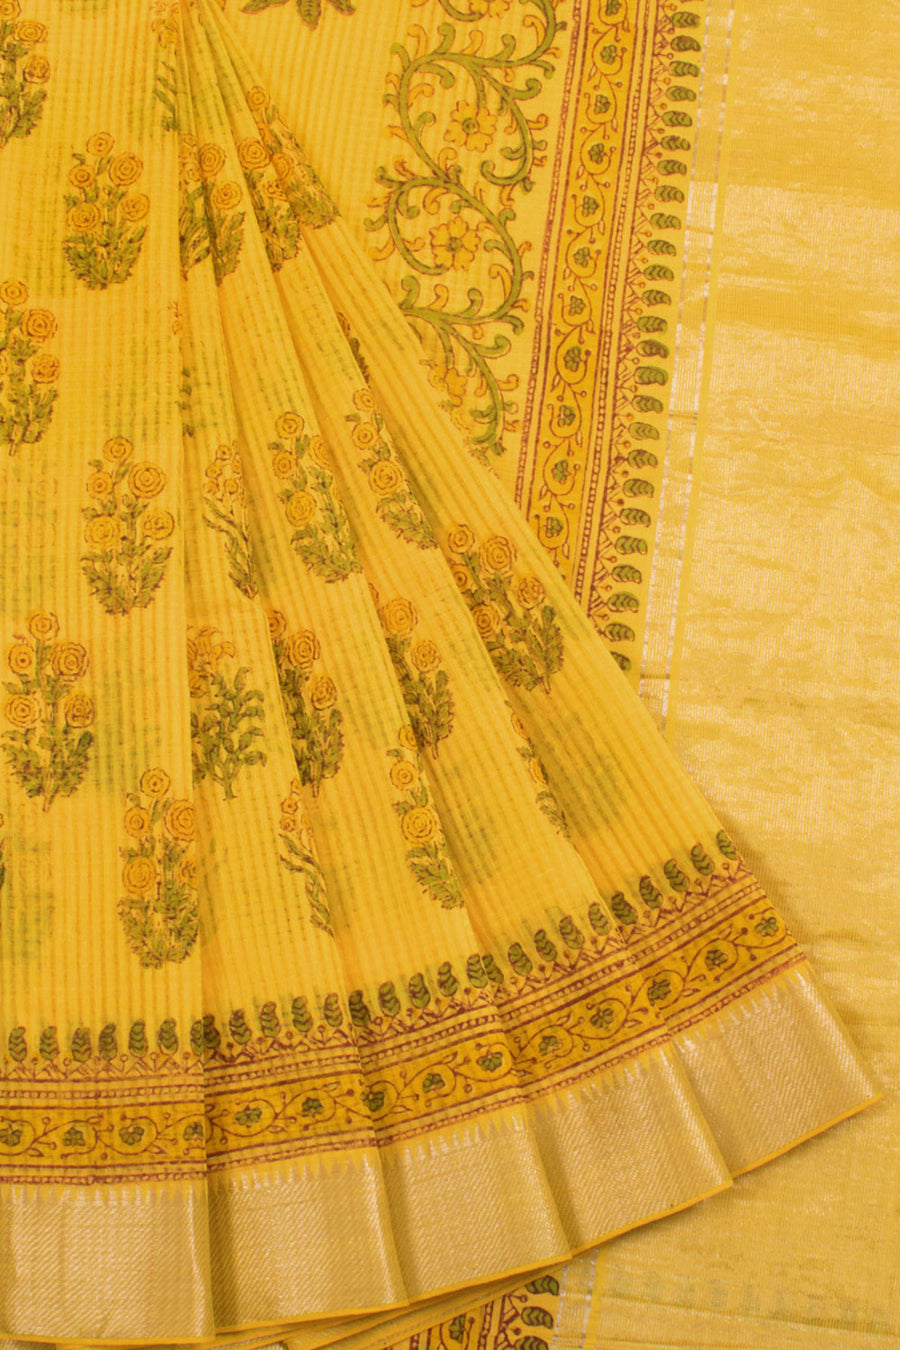 Hand Block Printed Mangalgiri Silk Cotton Saree with Missing Weave Design and Floral Motifs 